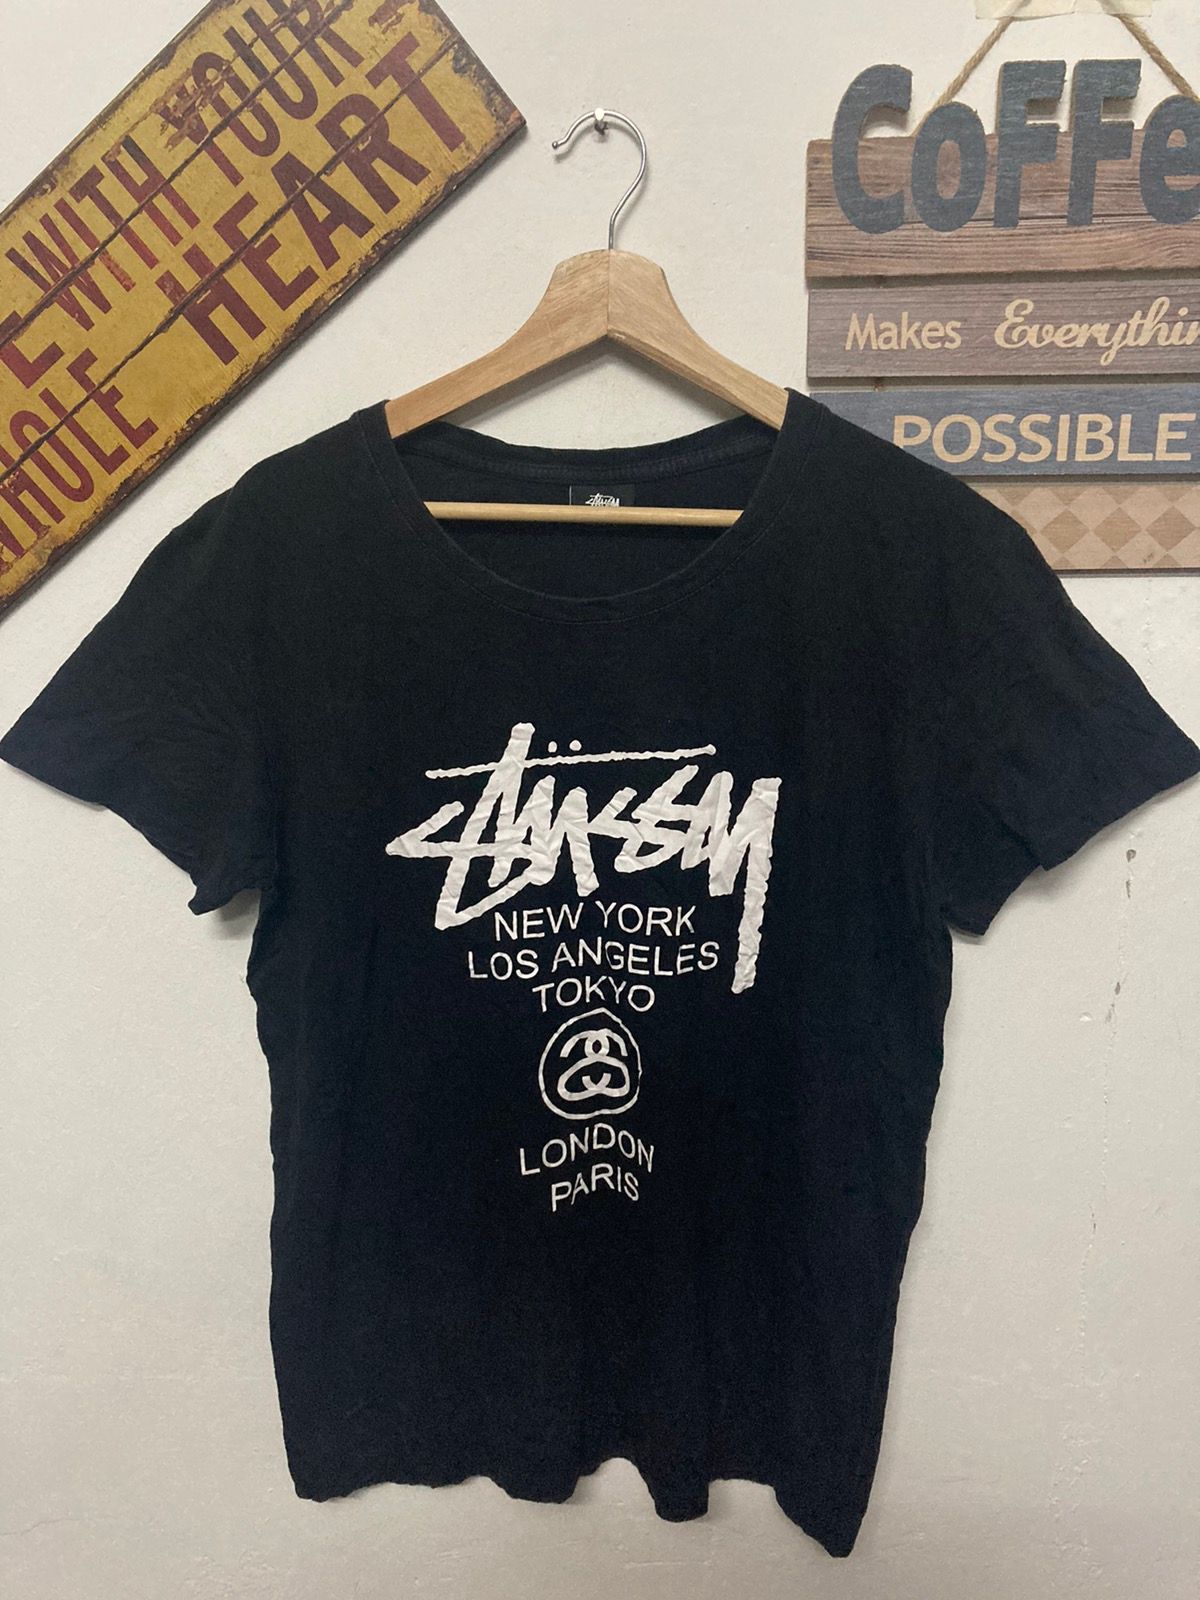 Stussy Tour Shirt For Women in XL size - 1